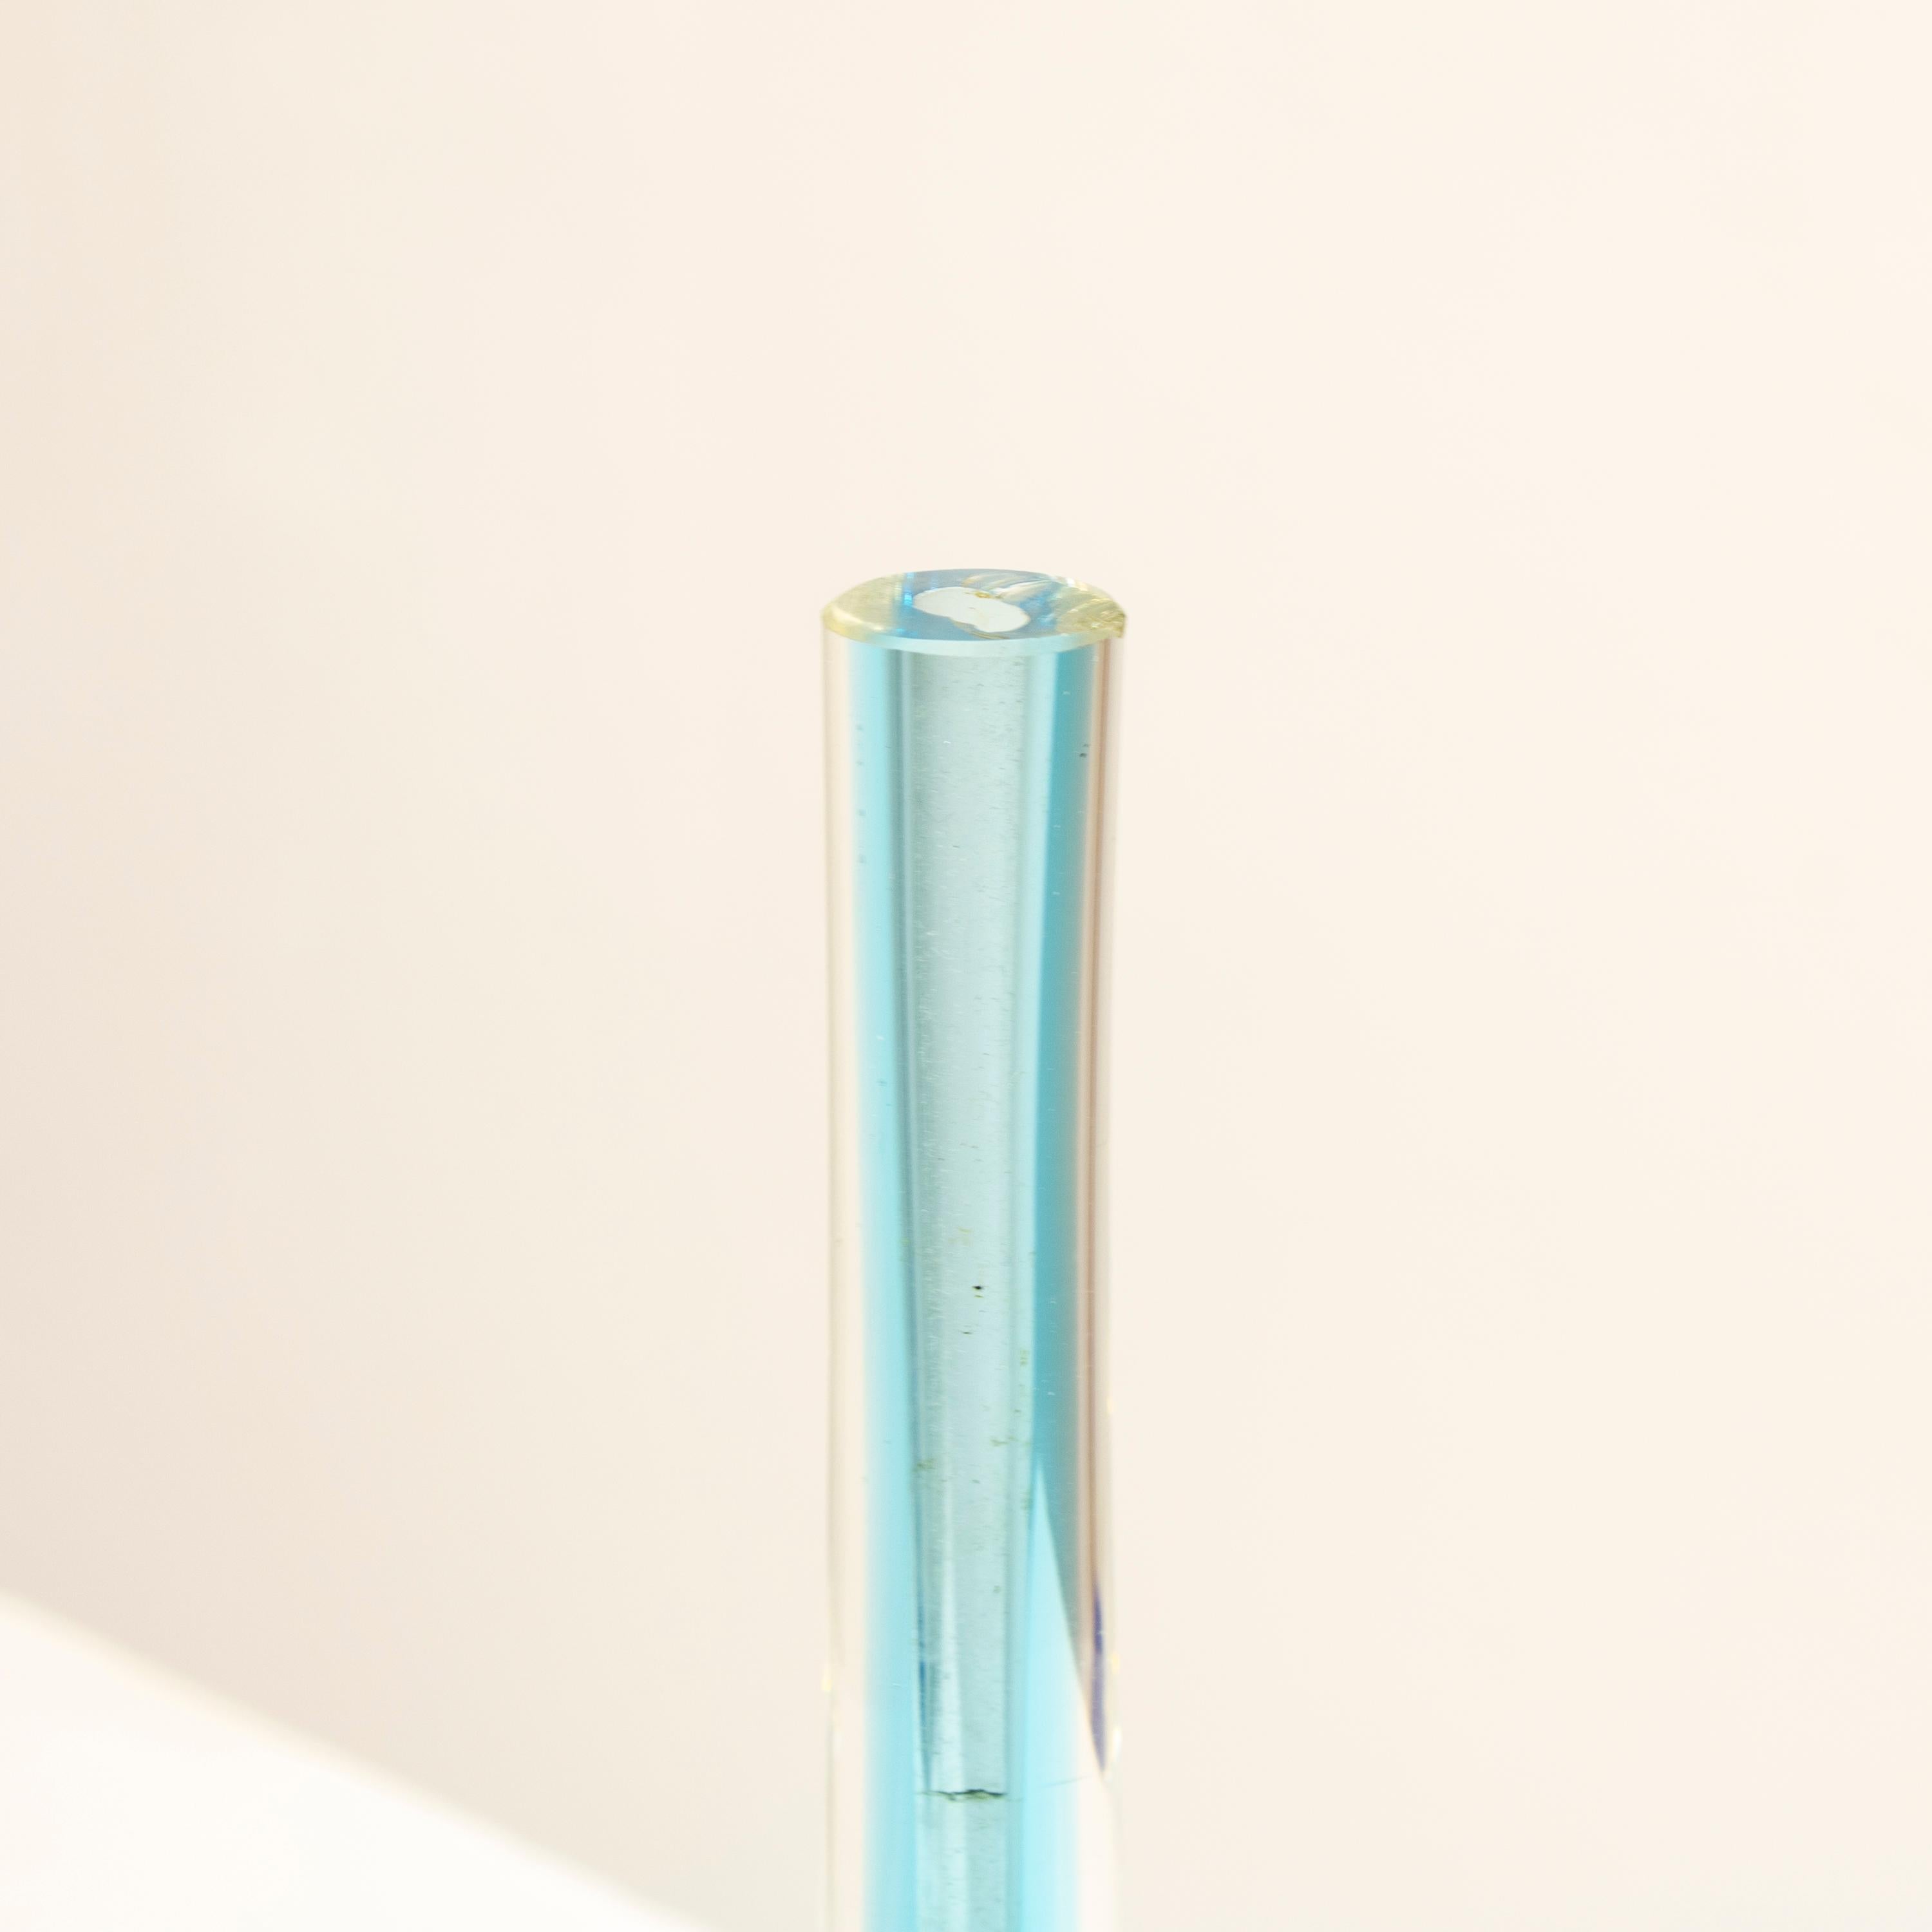 Mid-Century Modern Flavio Poli Hand-Crafted Blue Murano Small Glass Vase, Italy, 1970 For Sale